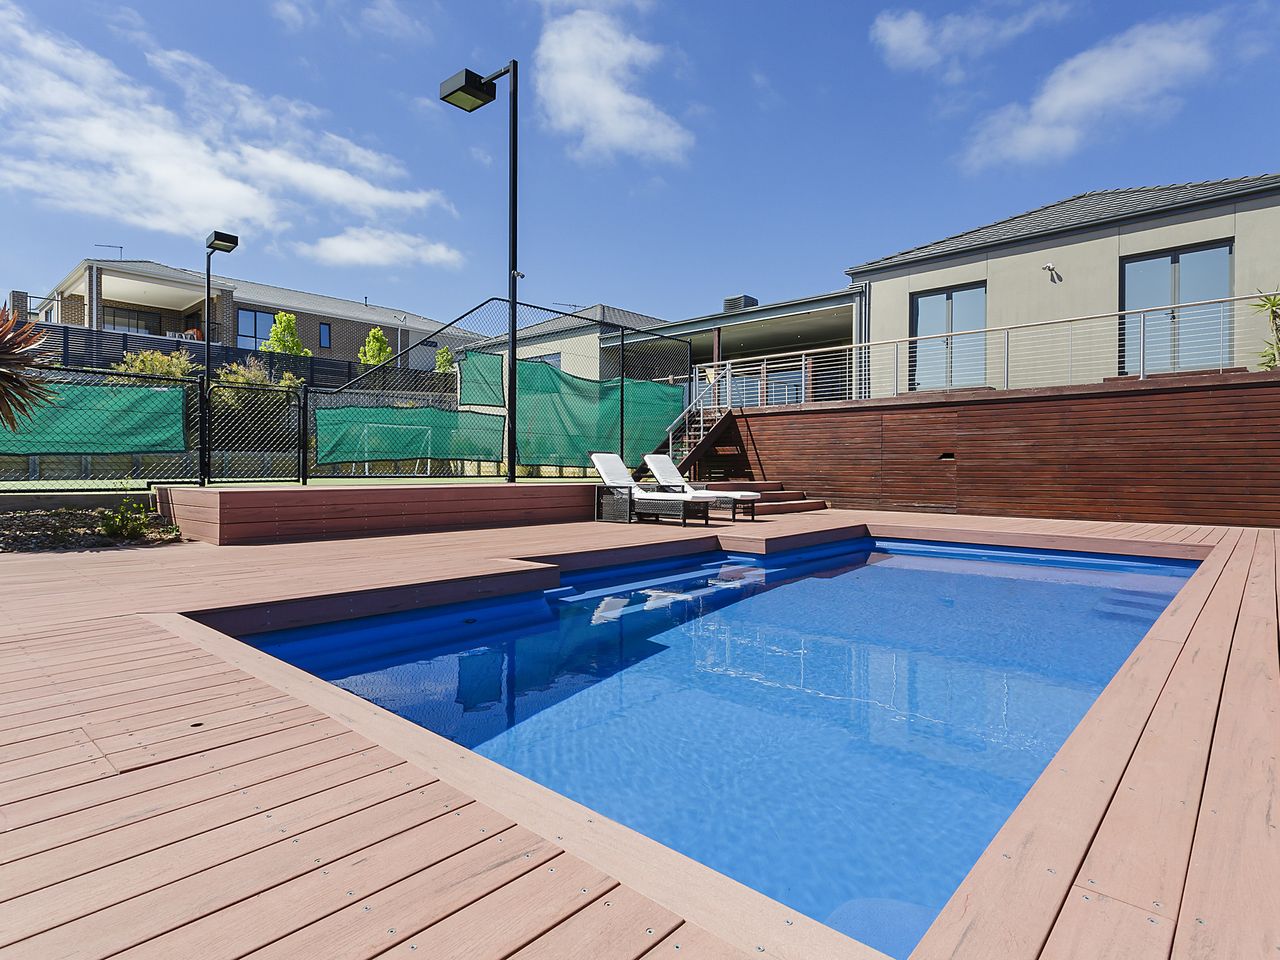 Property Image 2 - Outdoor Fun In The Sun - Swimming Pool and Tennis Court